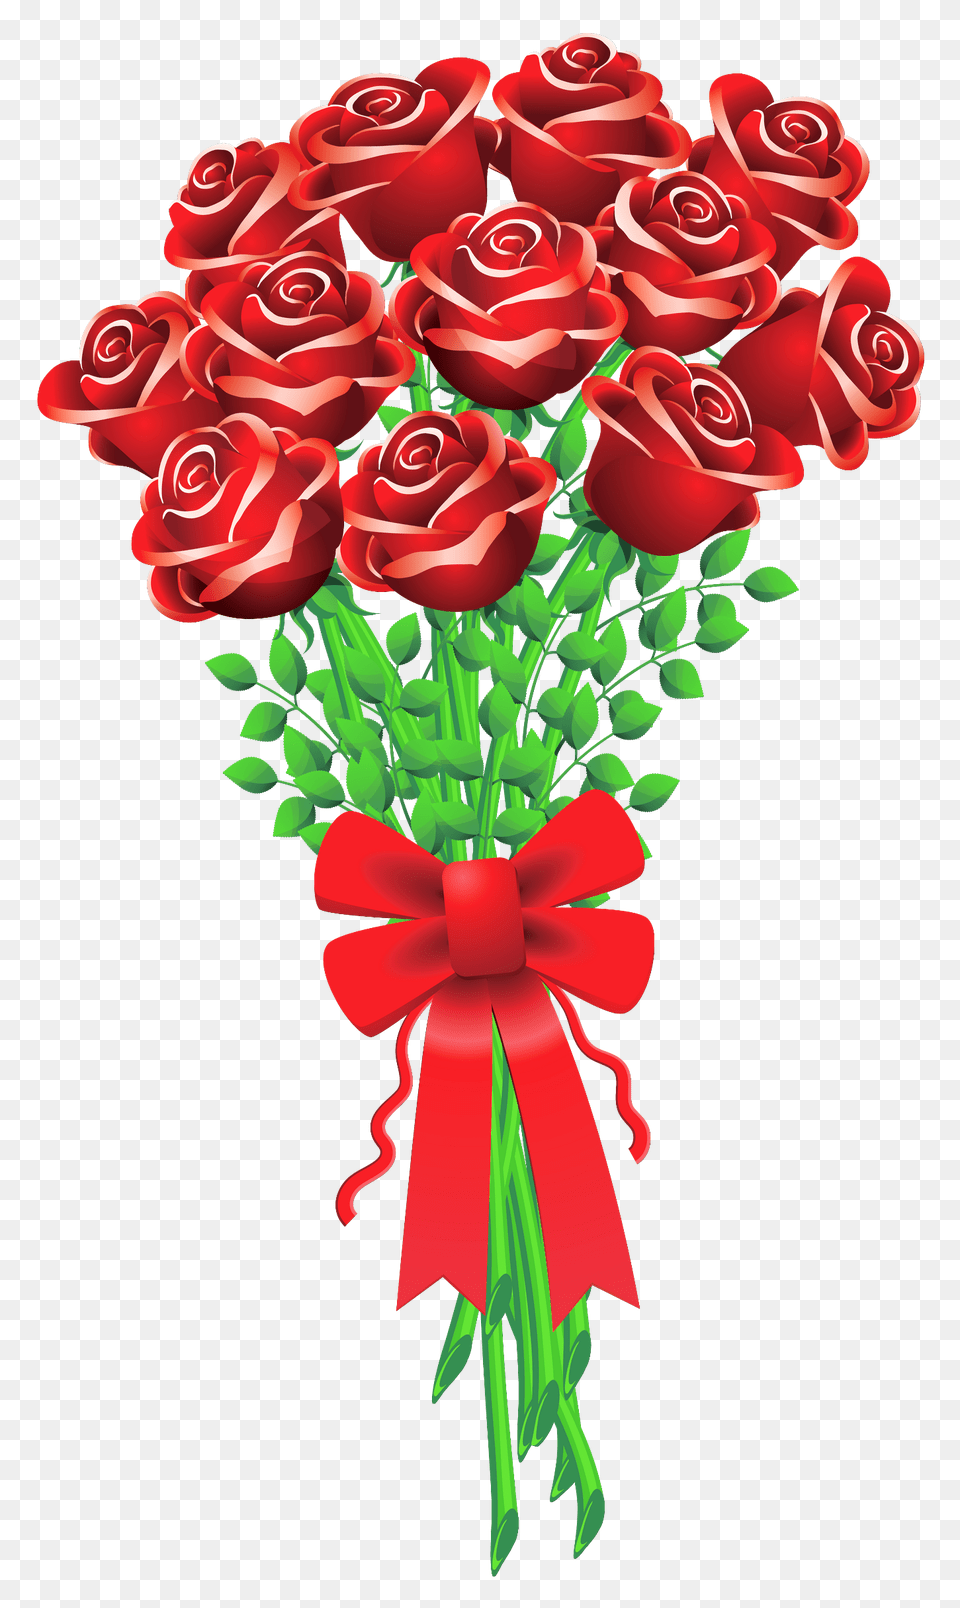 Rose Bouquet Clipart Picture Bouquet Of Roses Clipart, Flower Bouquet, Plant, Flower, Flower Arrangement Png